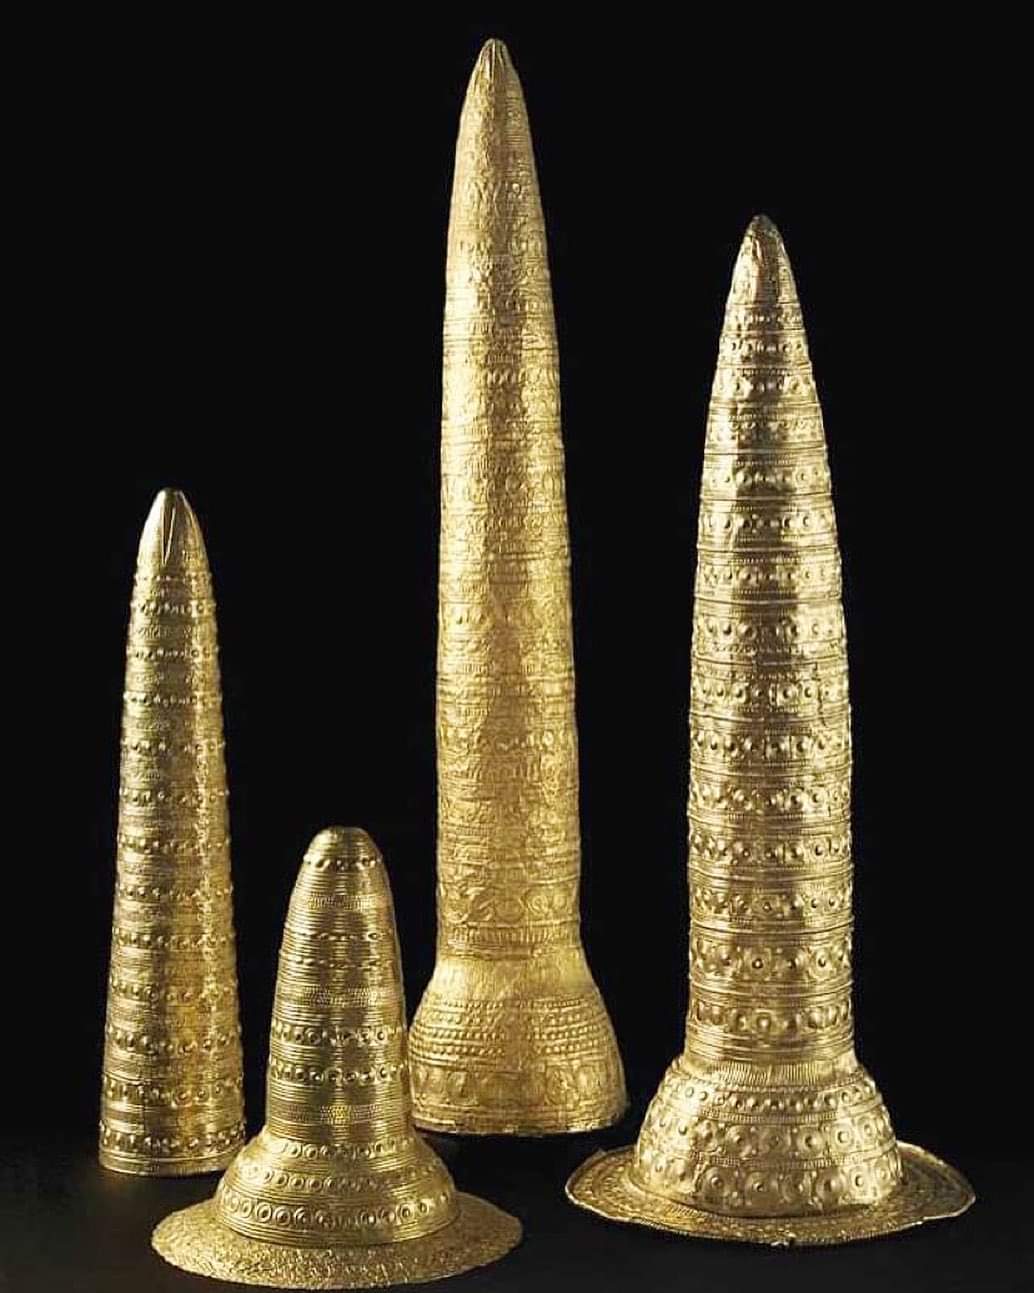 The Golden Hats, dating from 1400–800 BC, are associated with the Bronze Age Urnfield culture of Central Europe.jpg